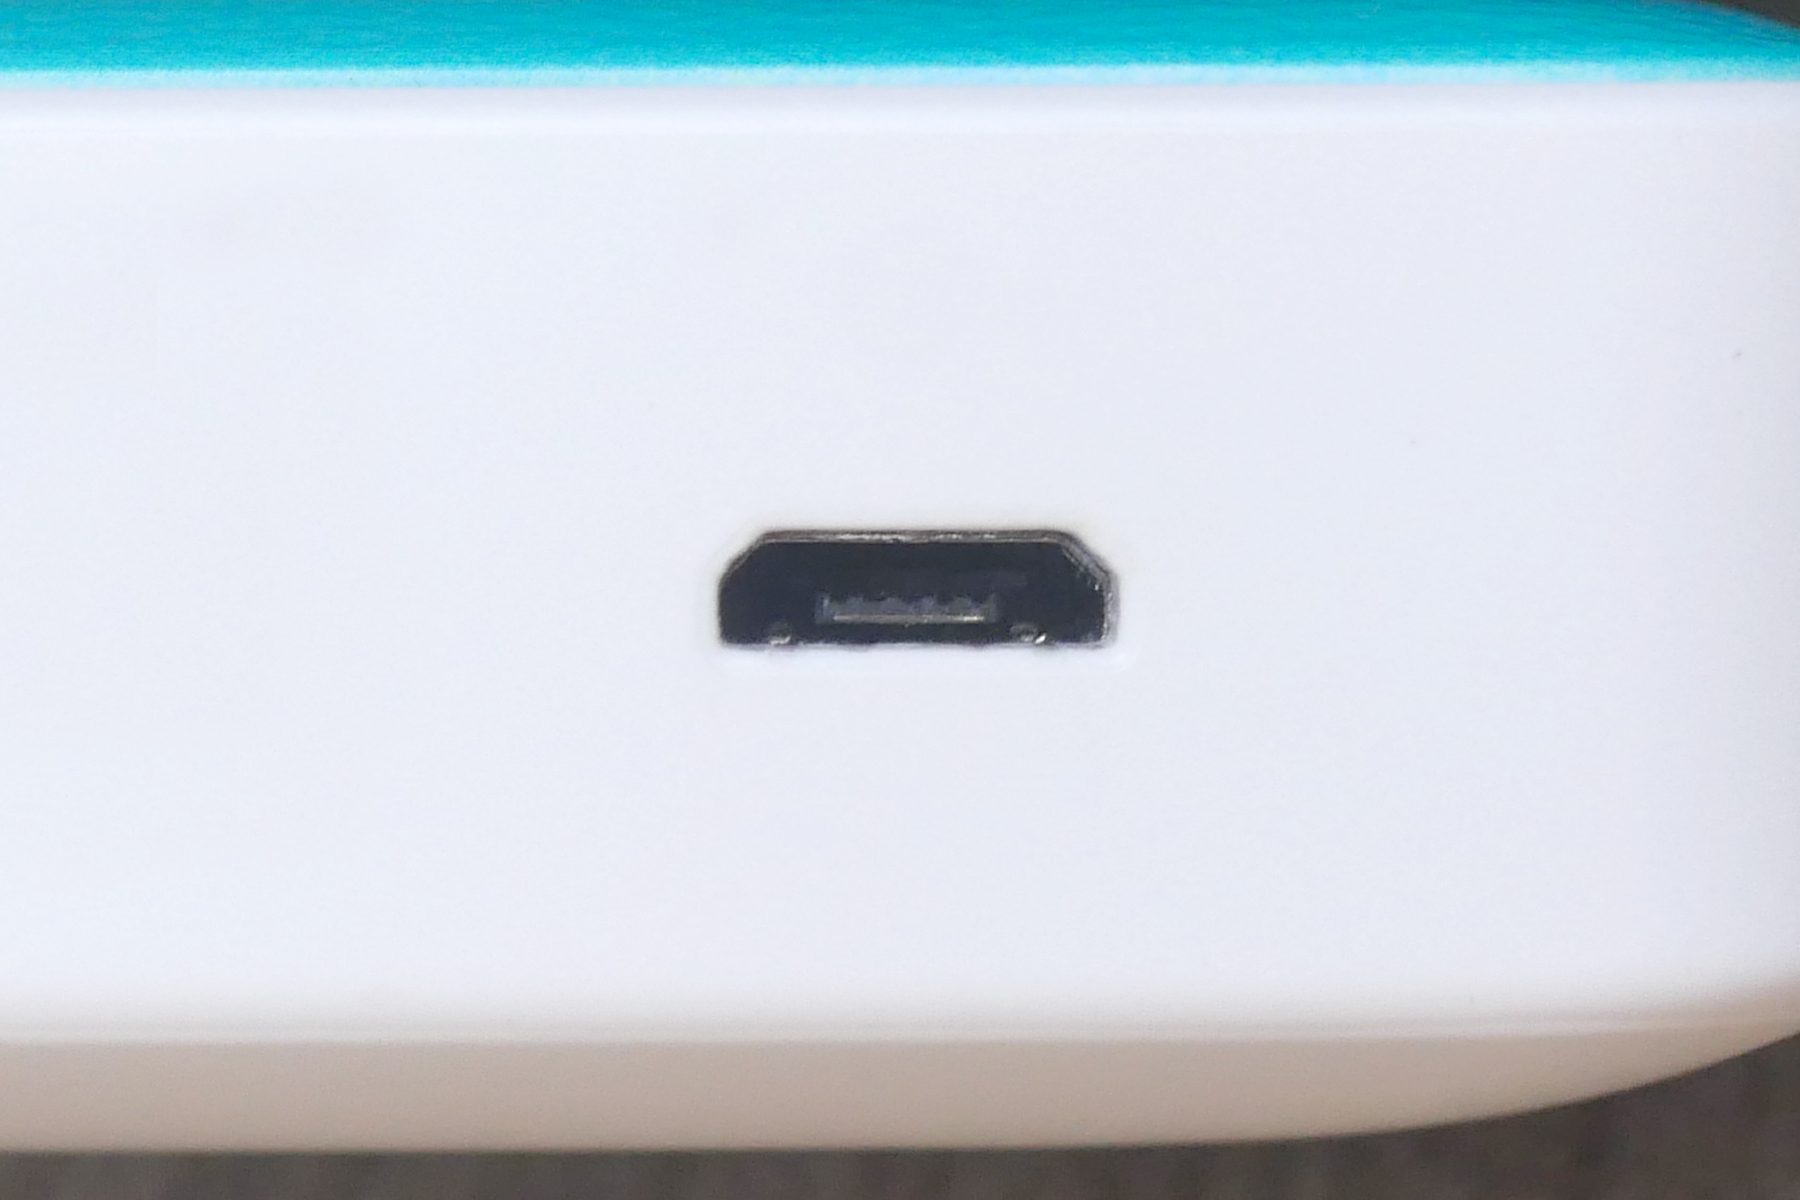 microUSB has largely been phased out in favour of USB-C. microUSB ports are found on older Android phones and tablets, as well as numerous other devices such as Amazon Kindle ebook readers, power banks, wireless headphones and older, now uncommon types of smartphone, such as Windows Mobile and Blackberry devices.